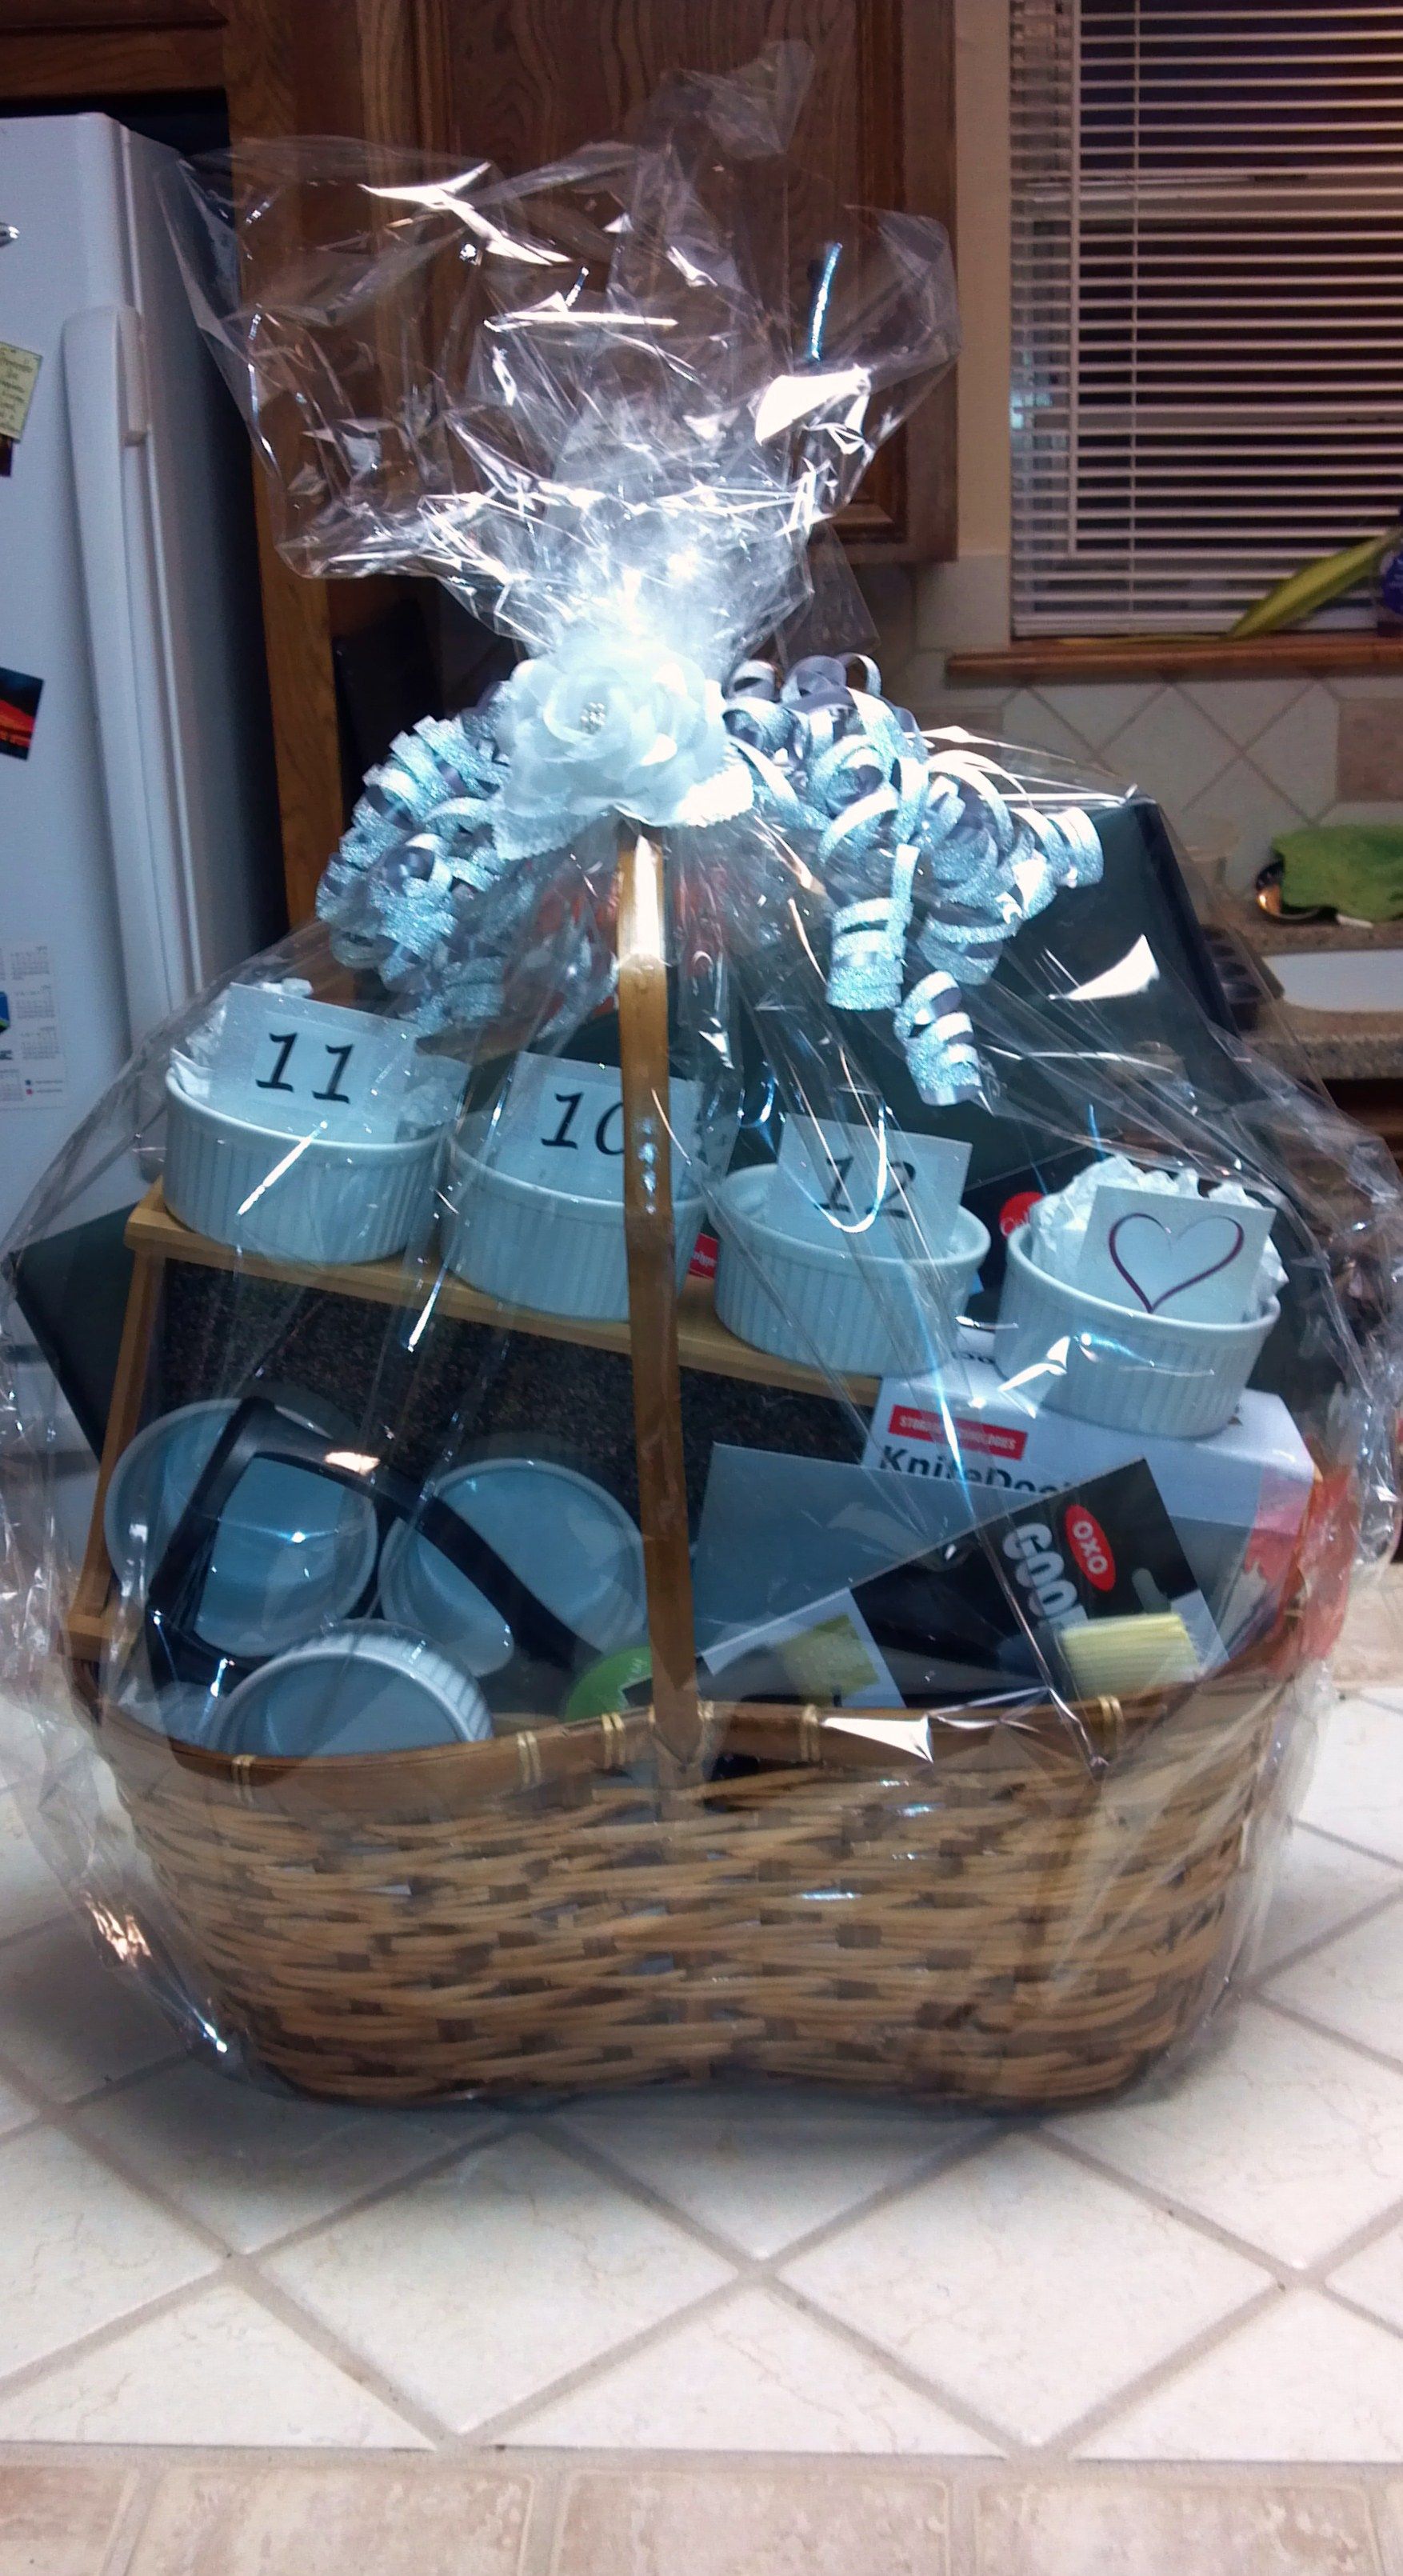 Wine and dine-themed gift basket